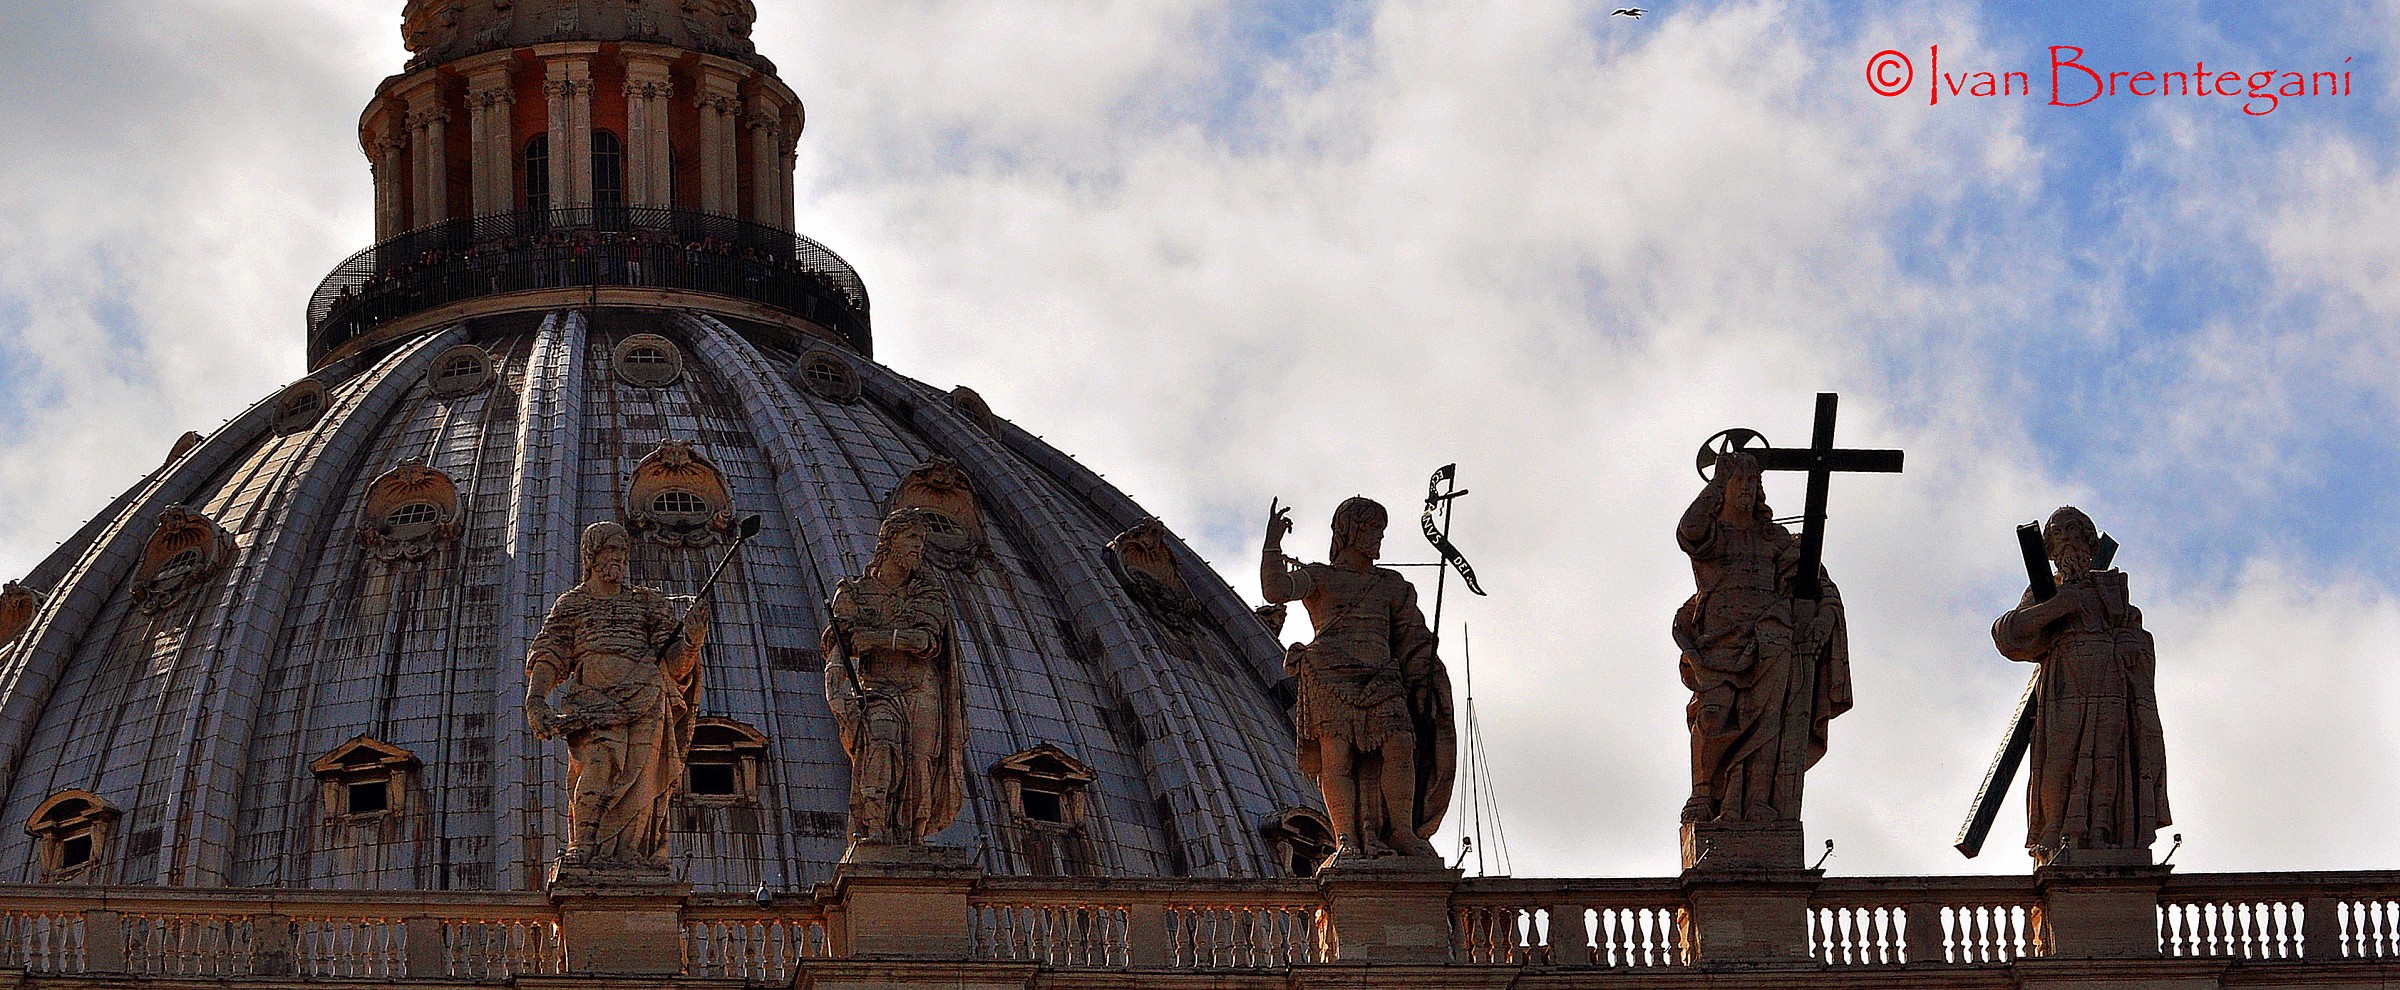 St. Peter is watching over Rome...